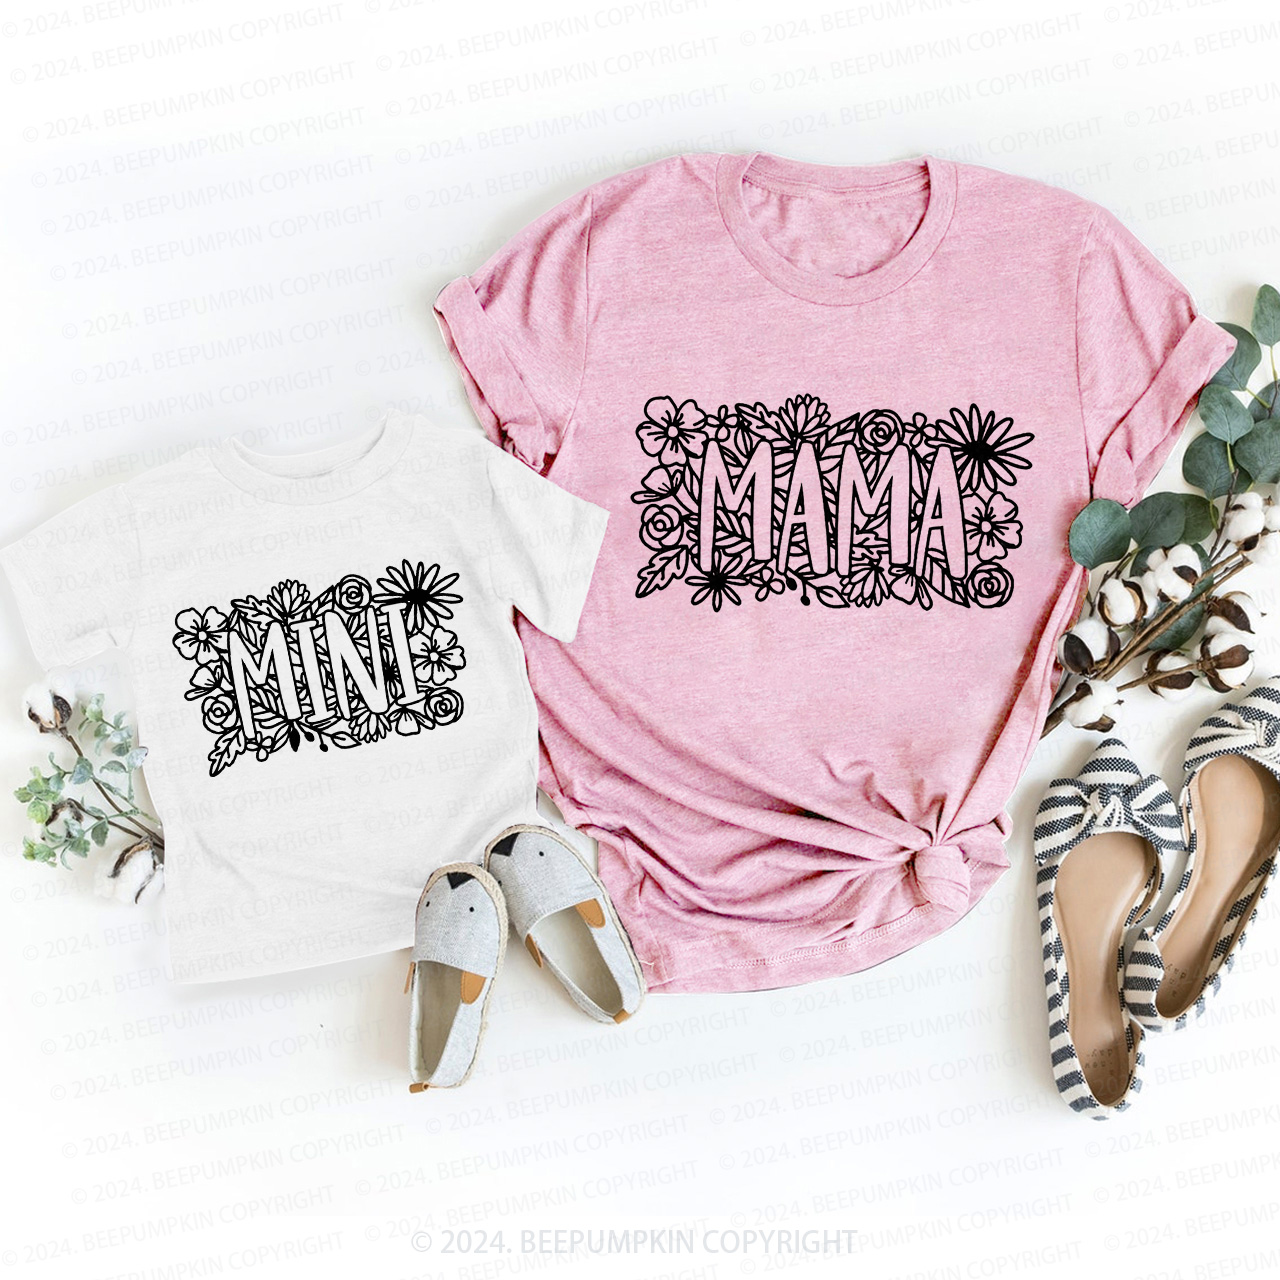  Floral Garden T-Shirts For Mom&Me